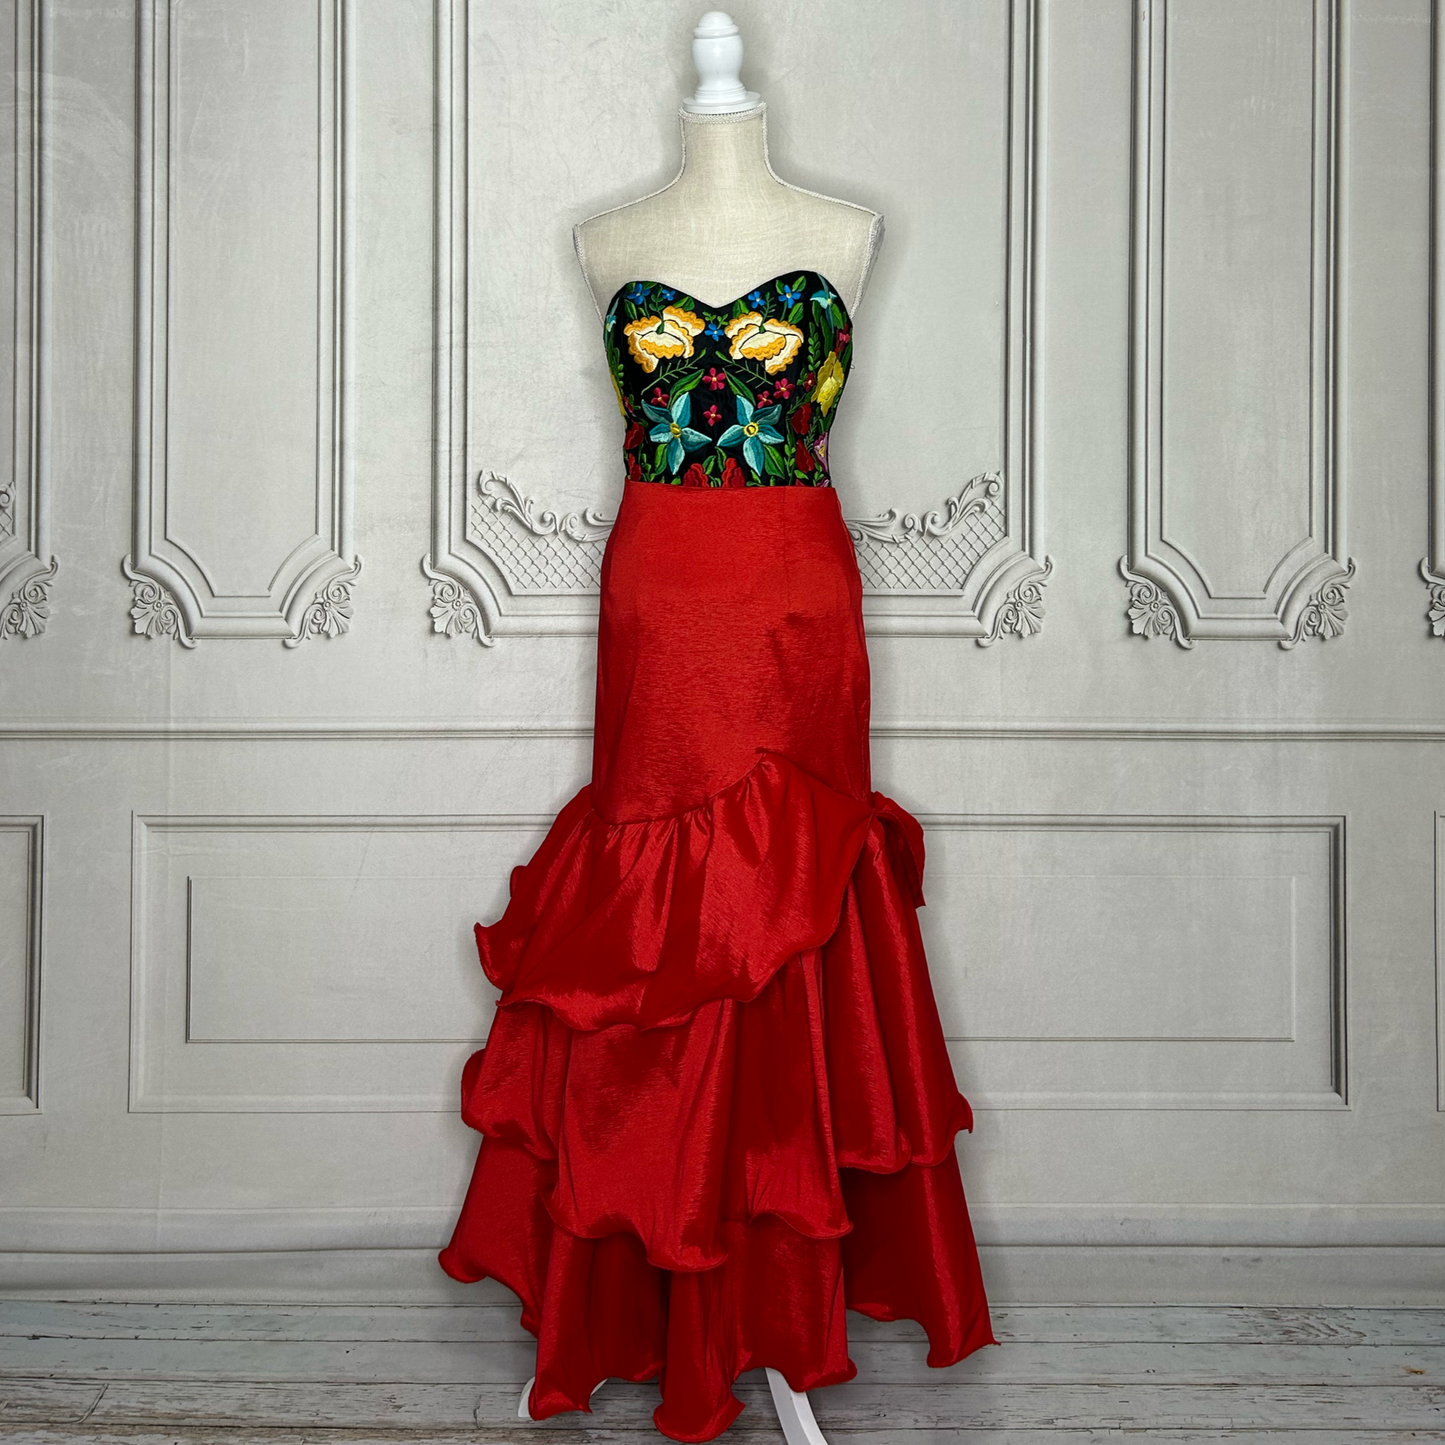 Embroidered Mexican Formal Corset and Skirt - Ruffled Mermaid